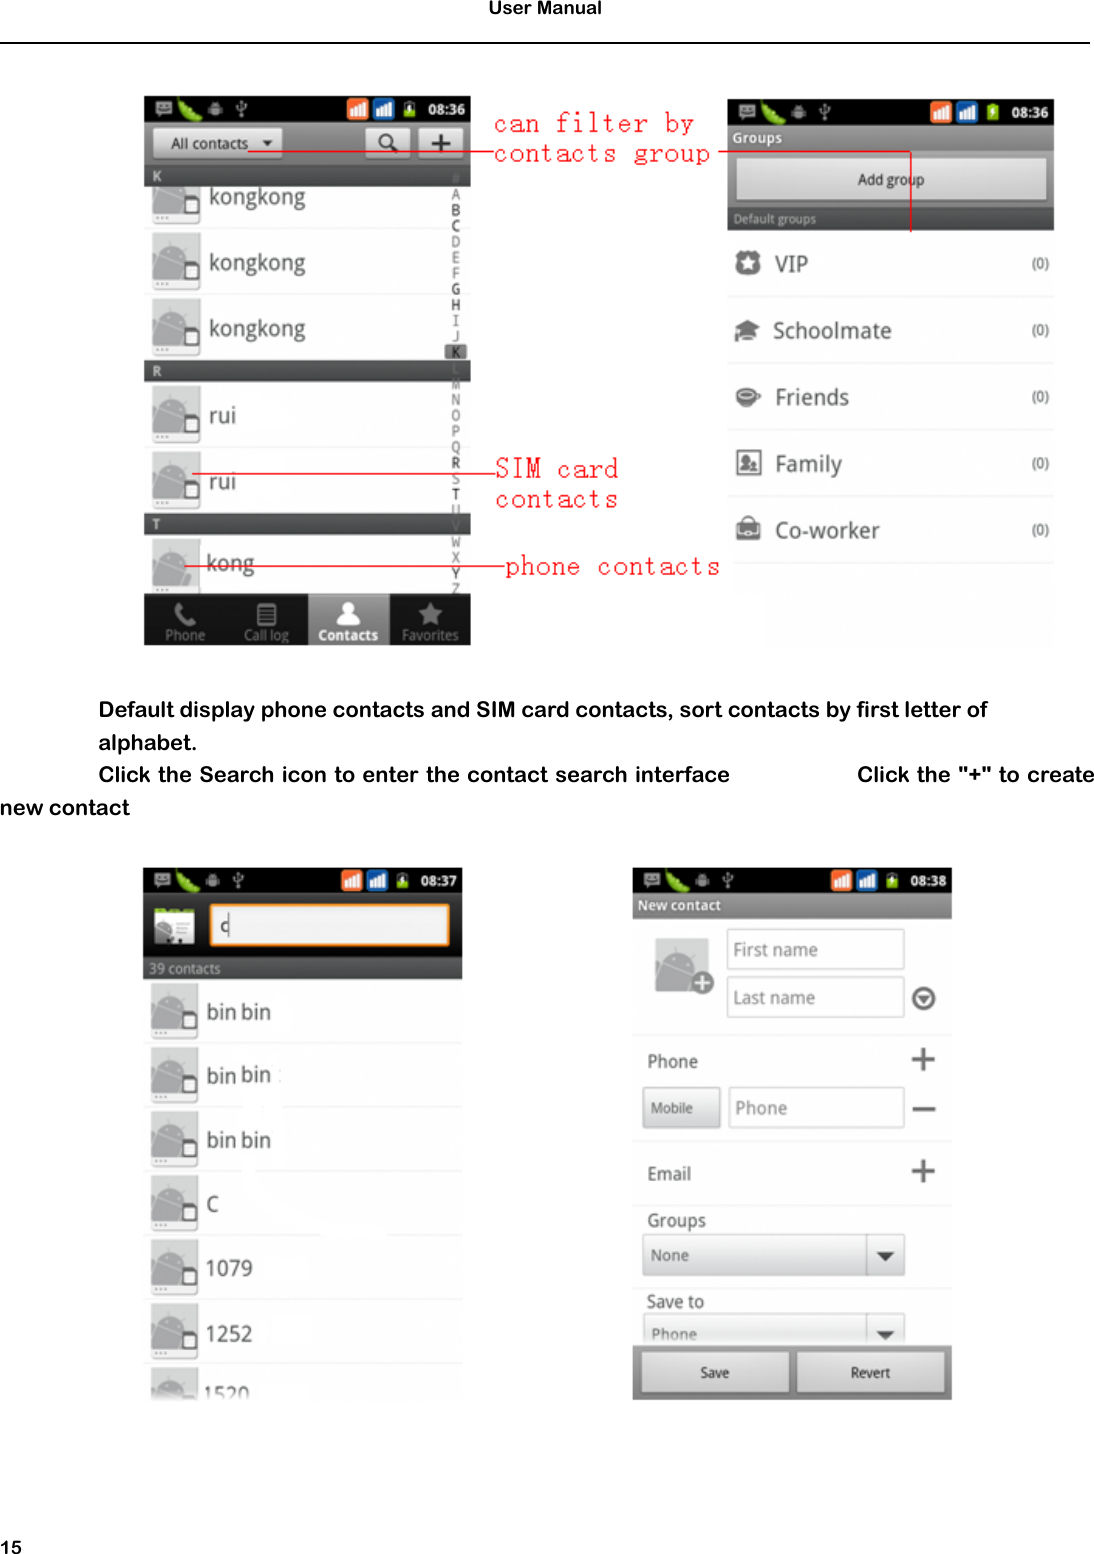 User Manual15Default display phone contacts and SIM card contacts, sort contacts by first letter ofalphabet.Click the Search icon to enter the contact search interface Click the &quot;+&quot; to createnew contact